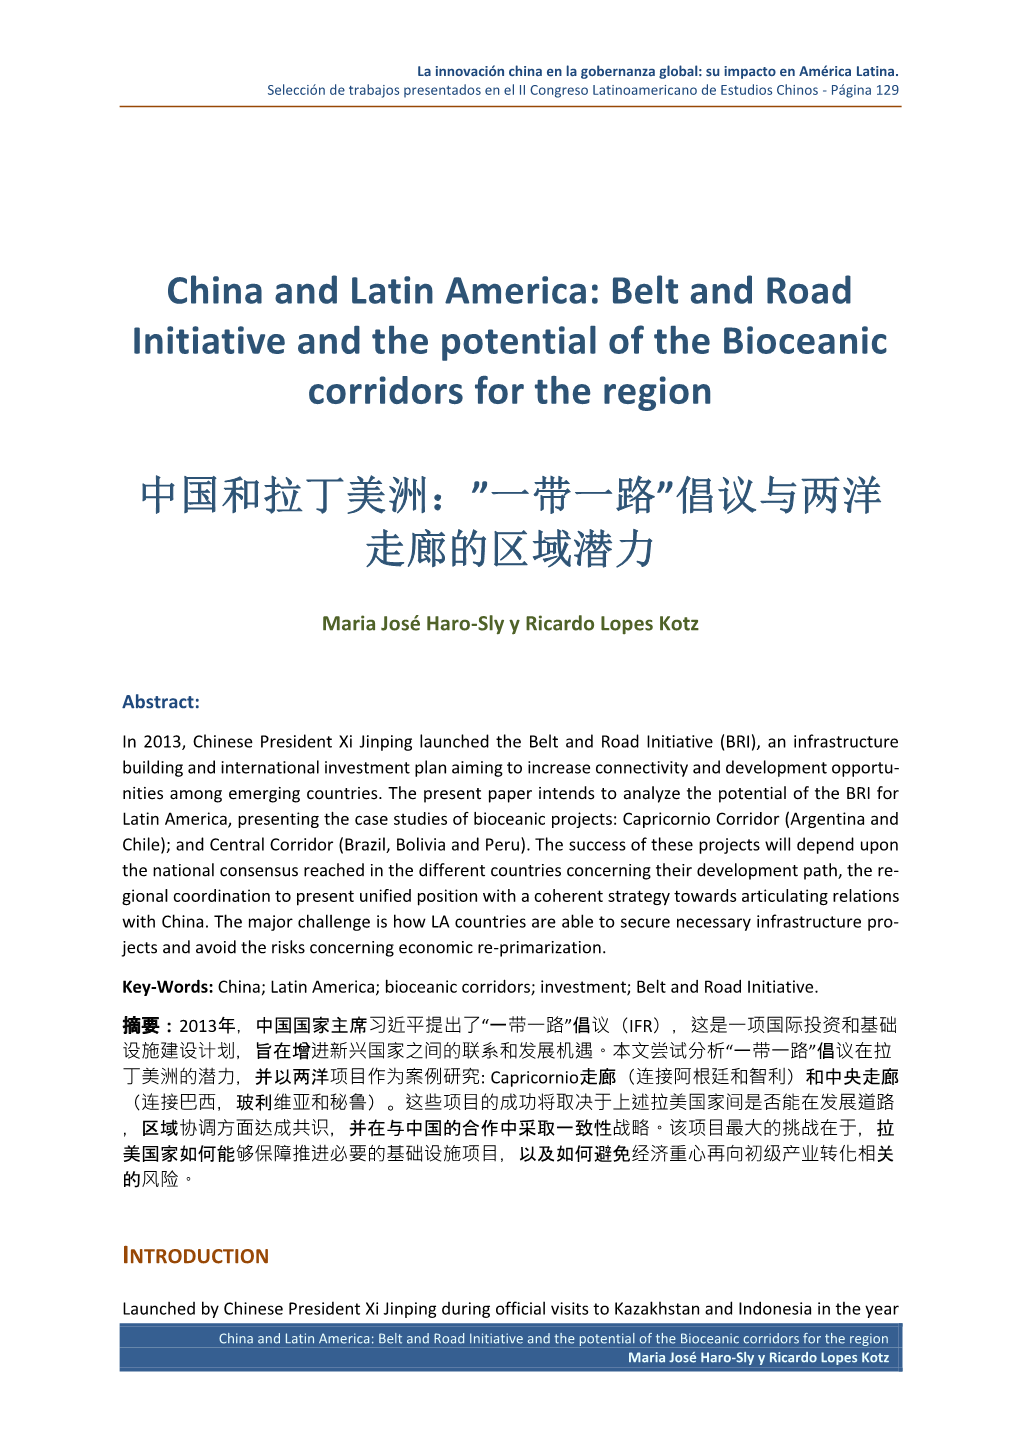 China and Latin America: Belt and Road Initiative and the Potential of the Bioceanic Corridors for the Region 中国和拉丁